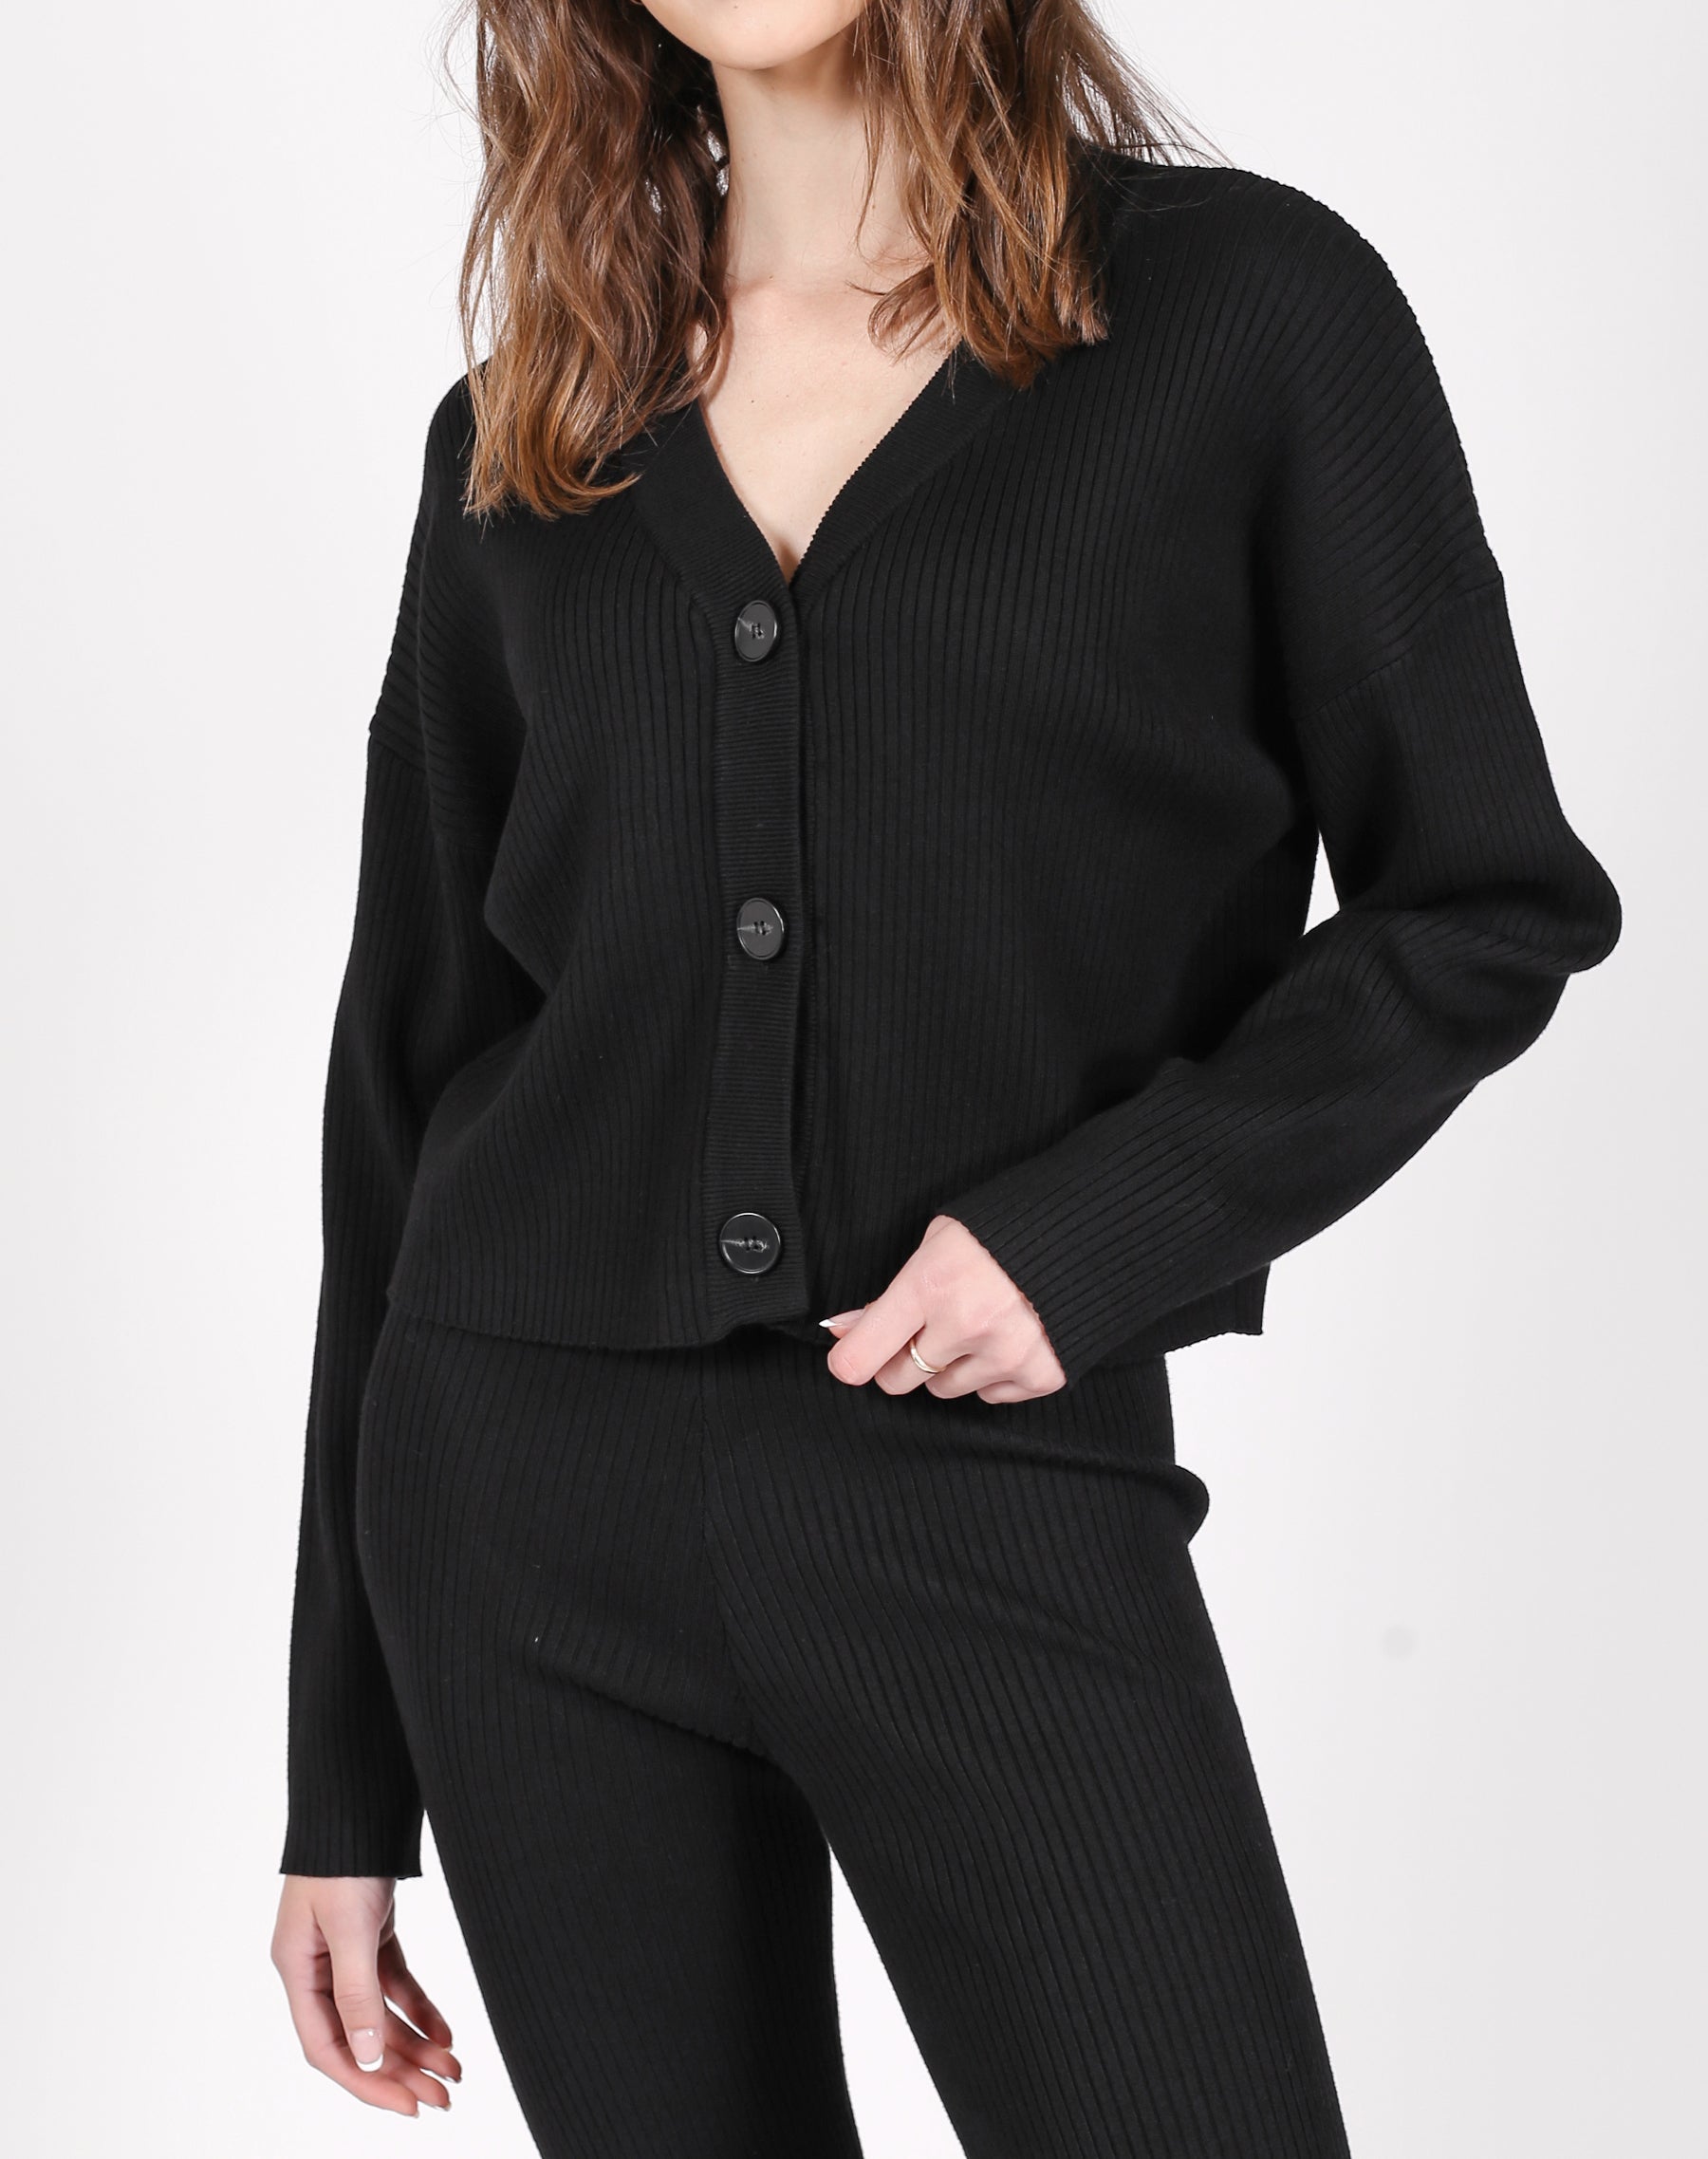 The Best Friend Ribbed Cardigan | Black